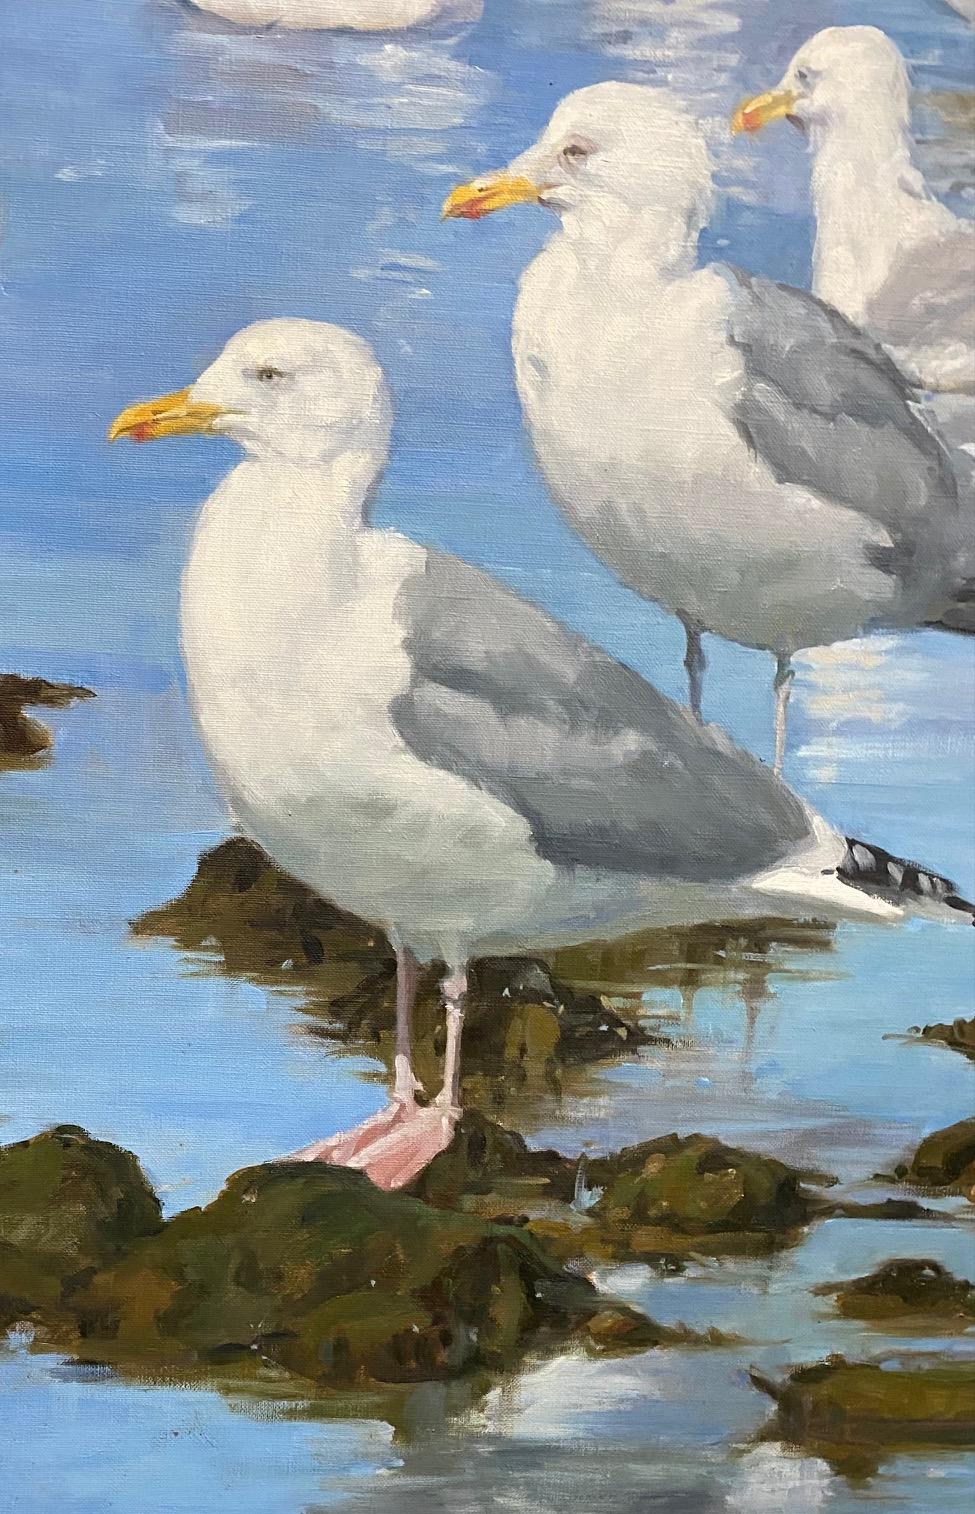 The summer may be winding down but your love of the sea never seems to.  Birds of a feather also extends to those strong willed, hearty beach friends, the seagulls!  They keep us company through thick or thin!  Realist painter Joseph Sundwall has